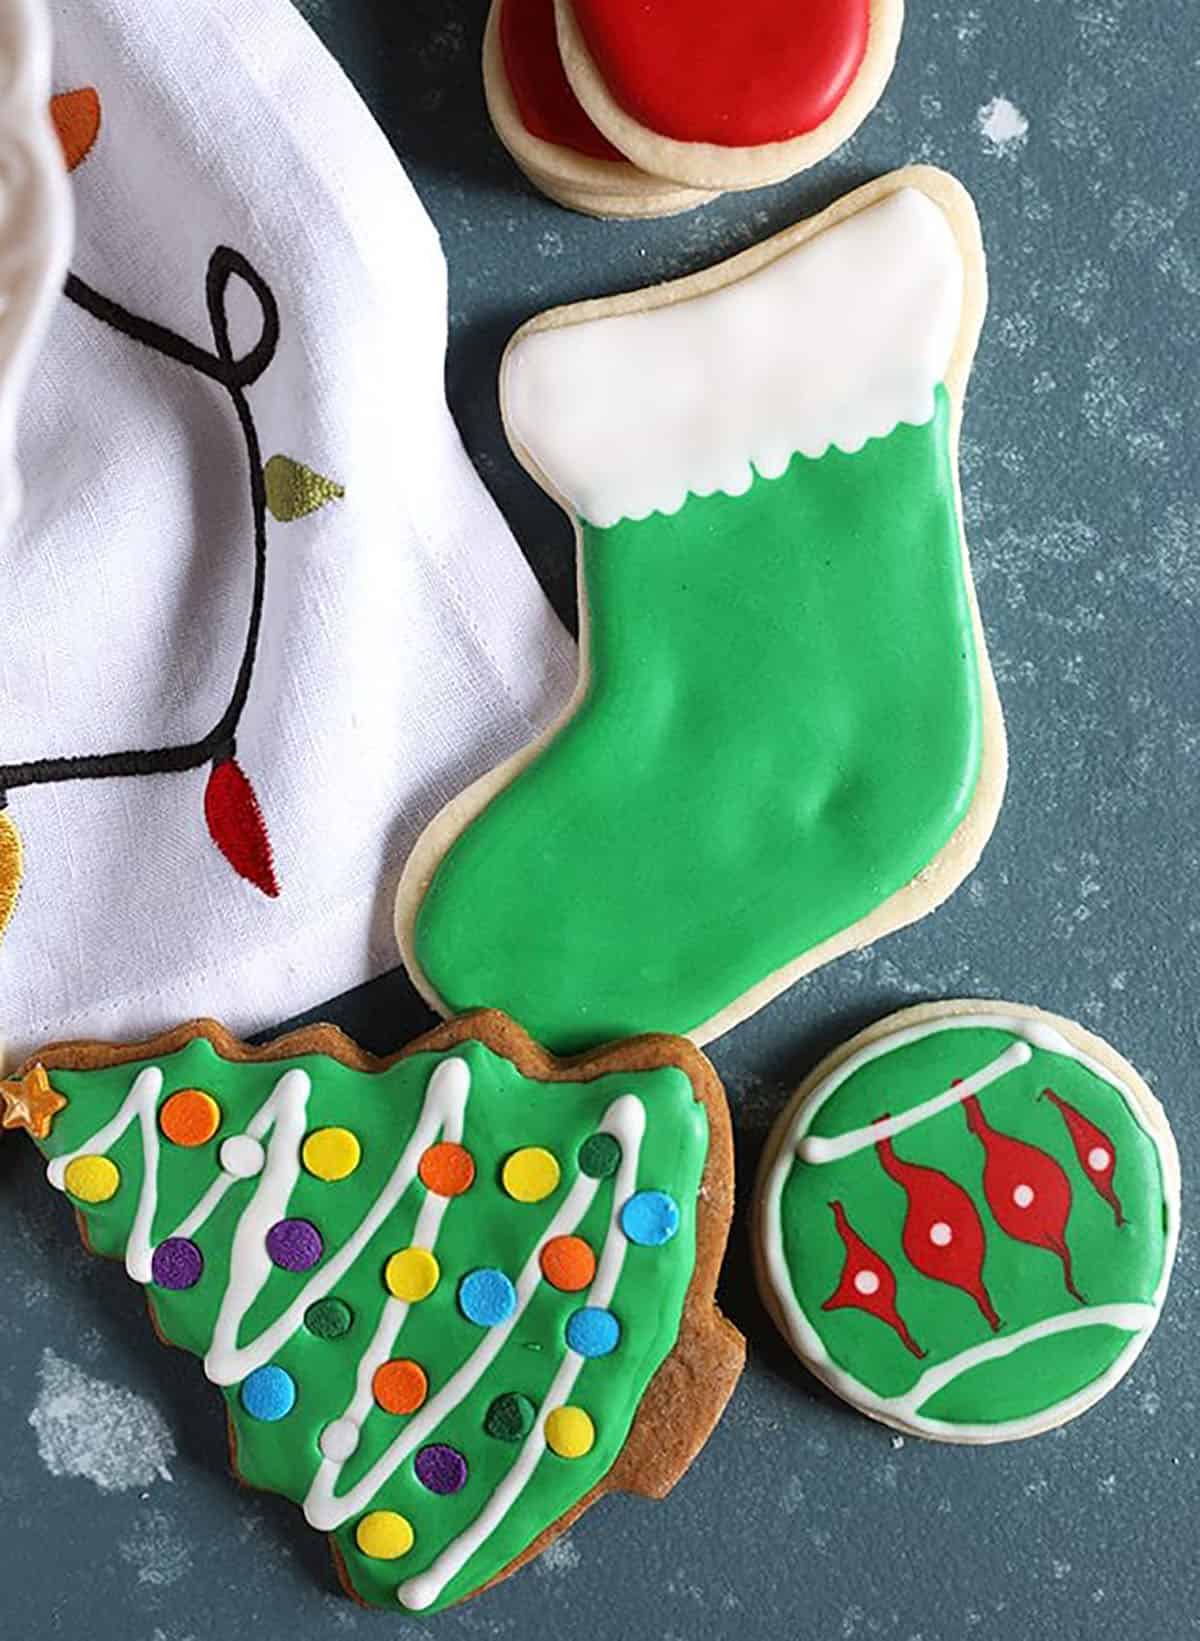 Overhead shot of a green stocking cookie and christmas tree cookie on a blue background.